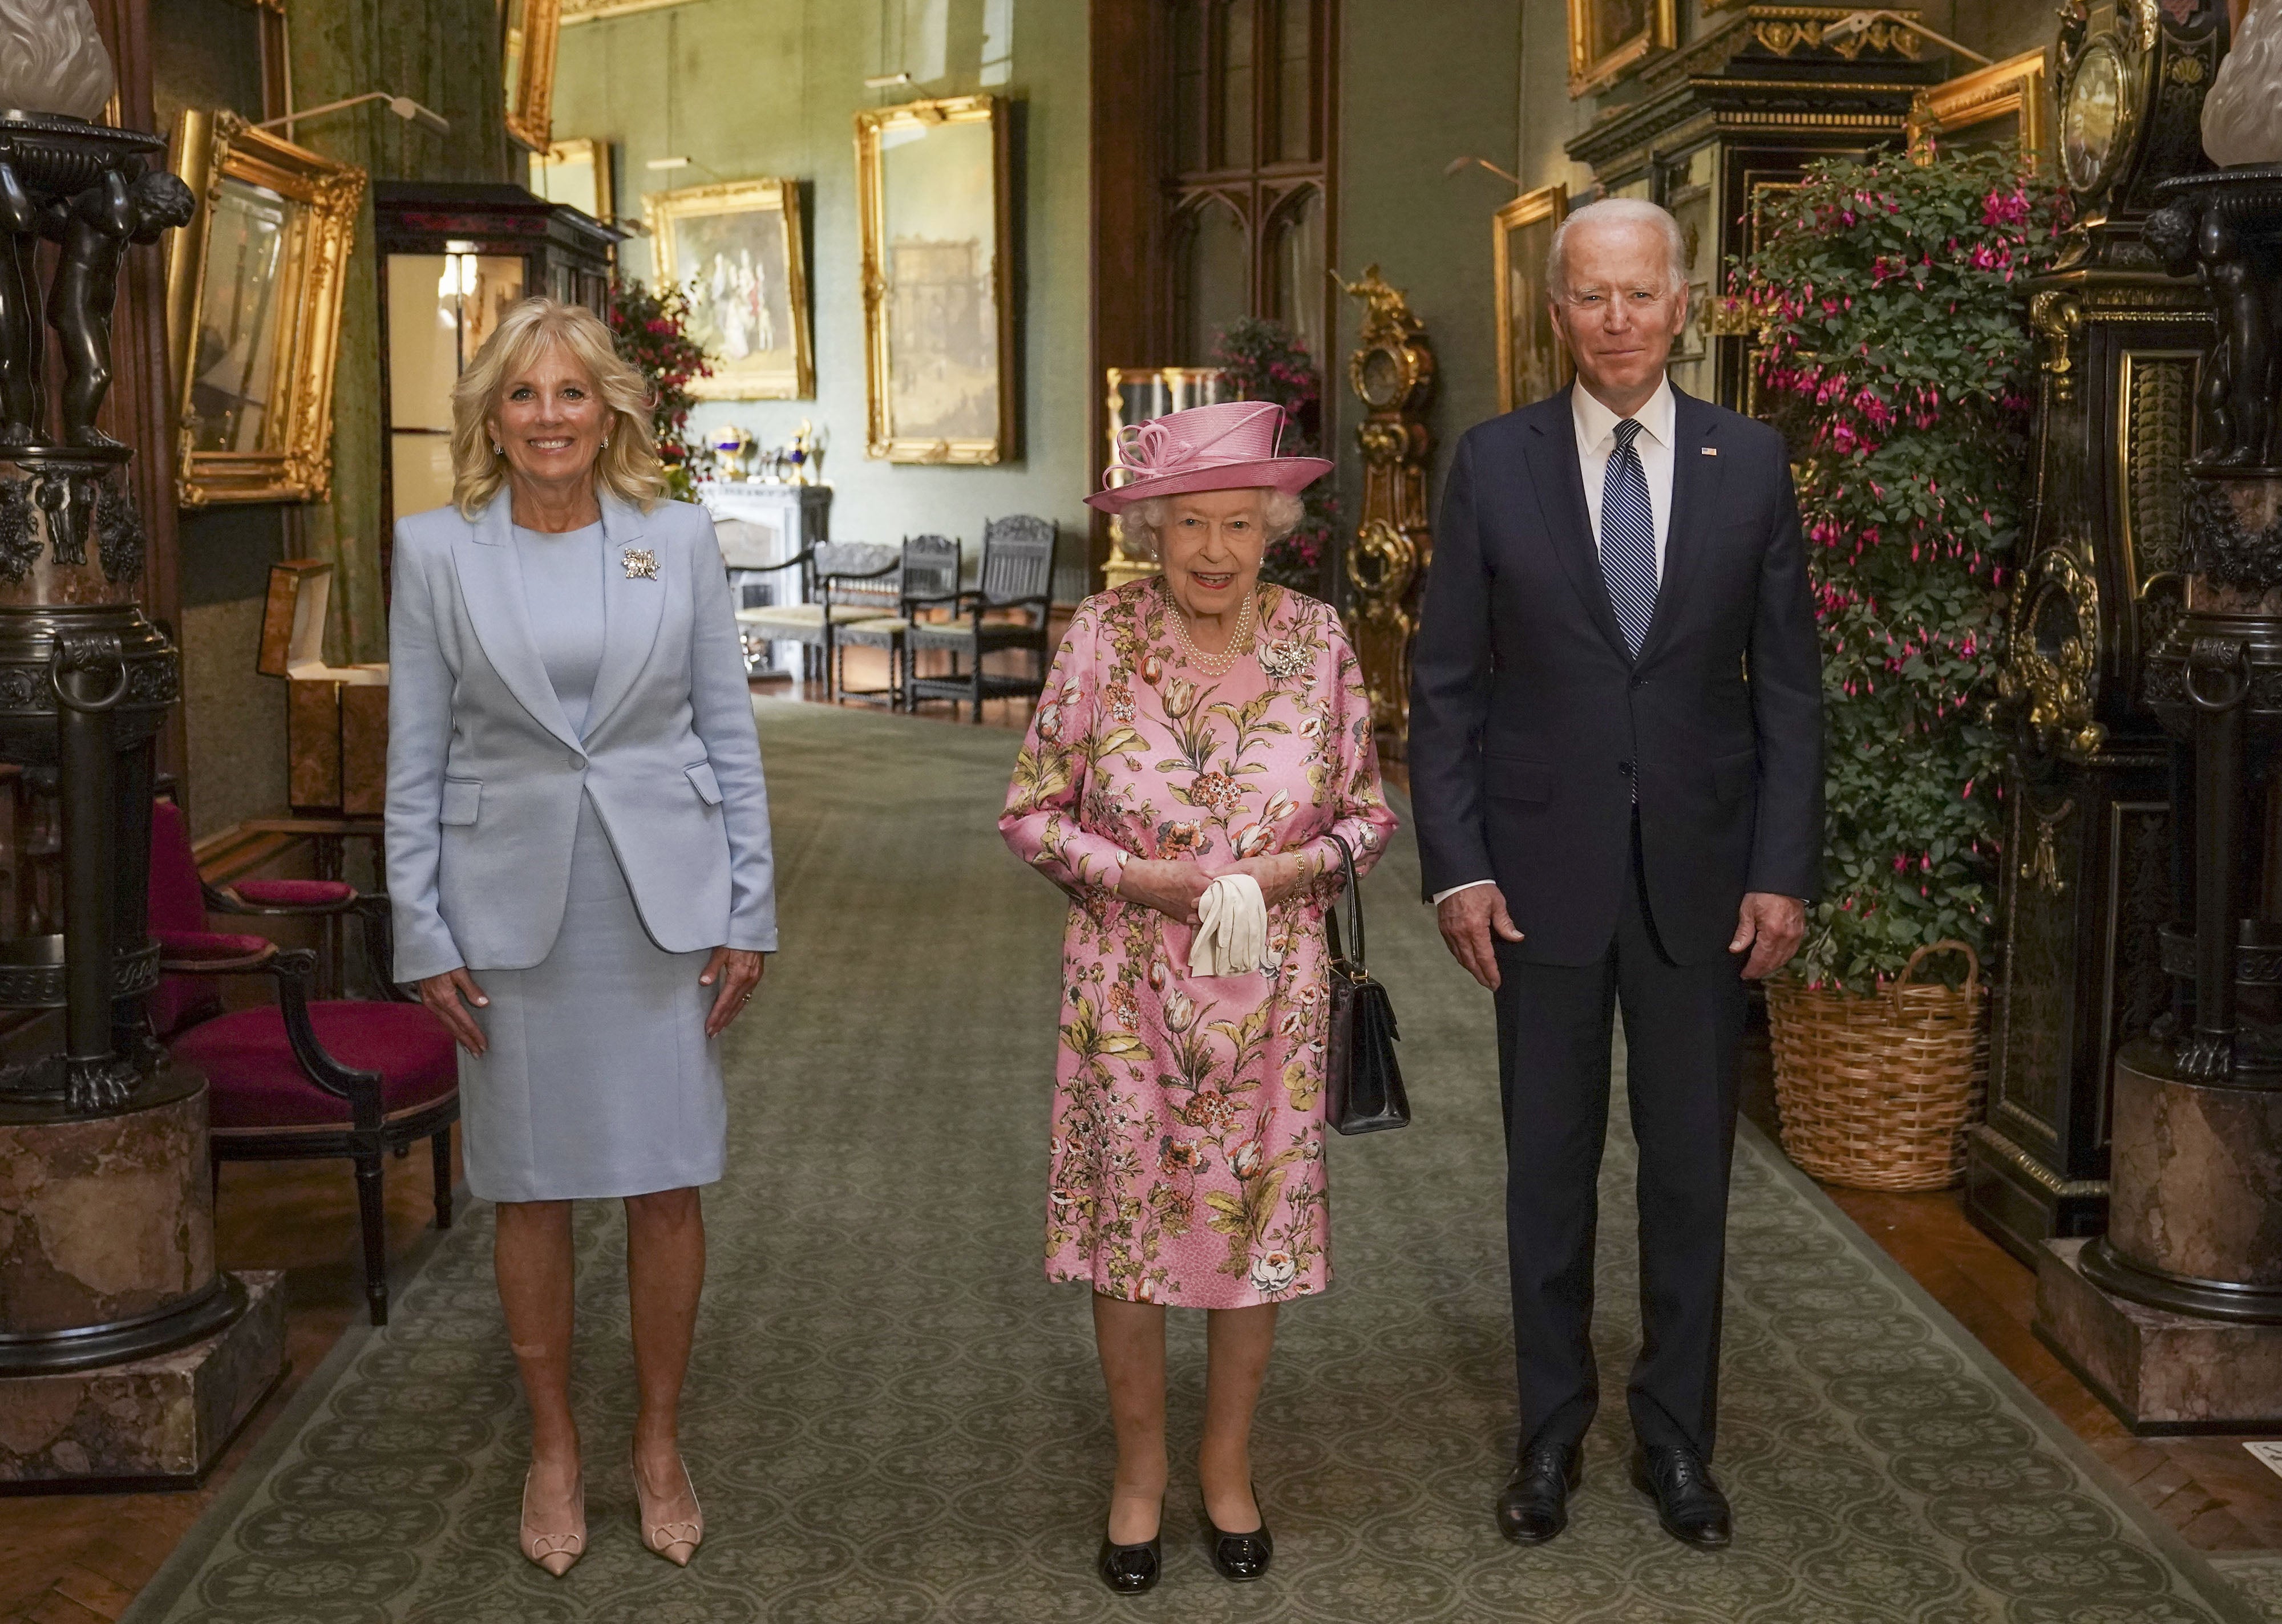 The Queen with US president Joe Biden and First Lady Jill Biden during their visit to Windsor Castle (Steve Parsons/PA)